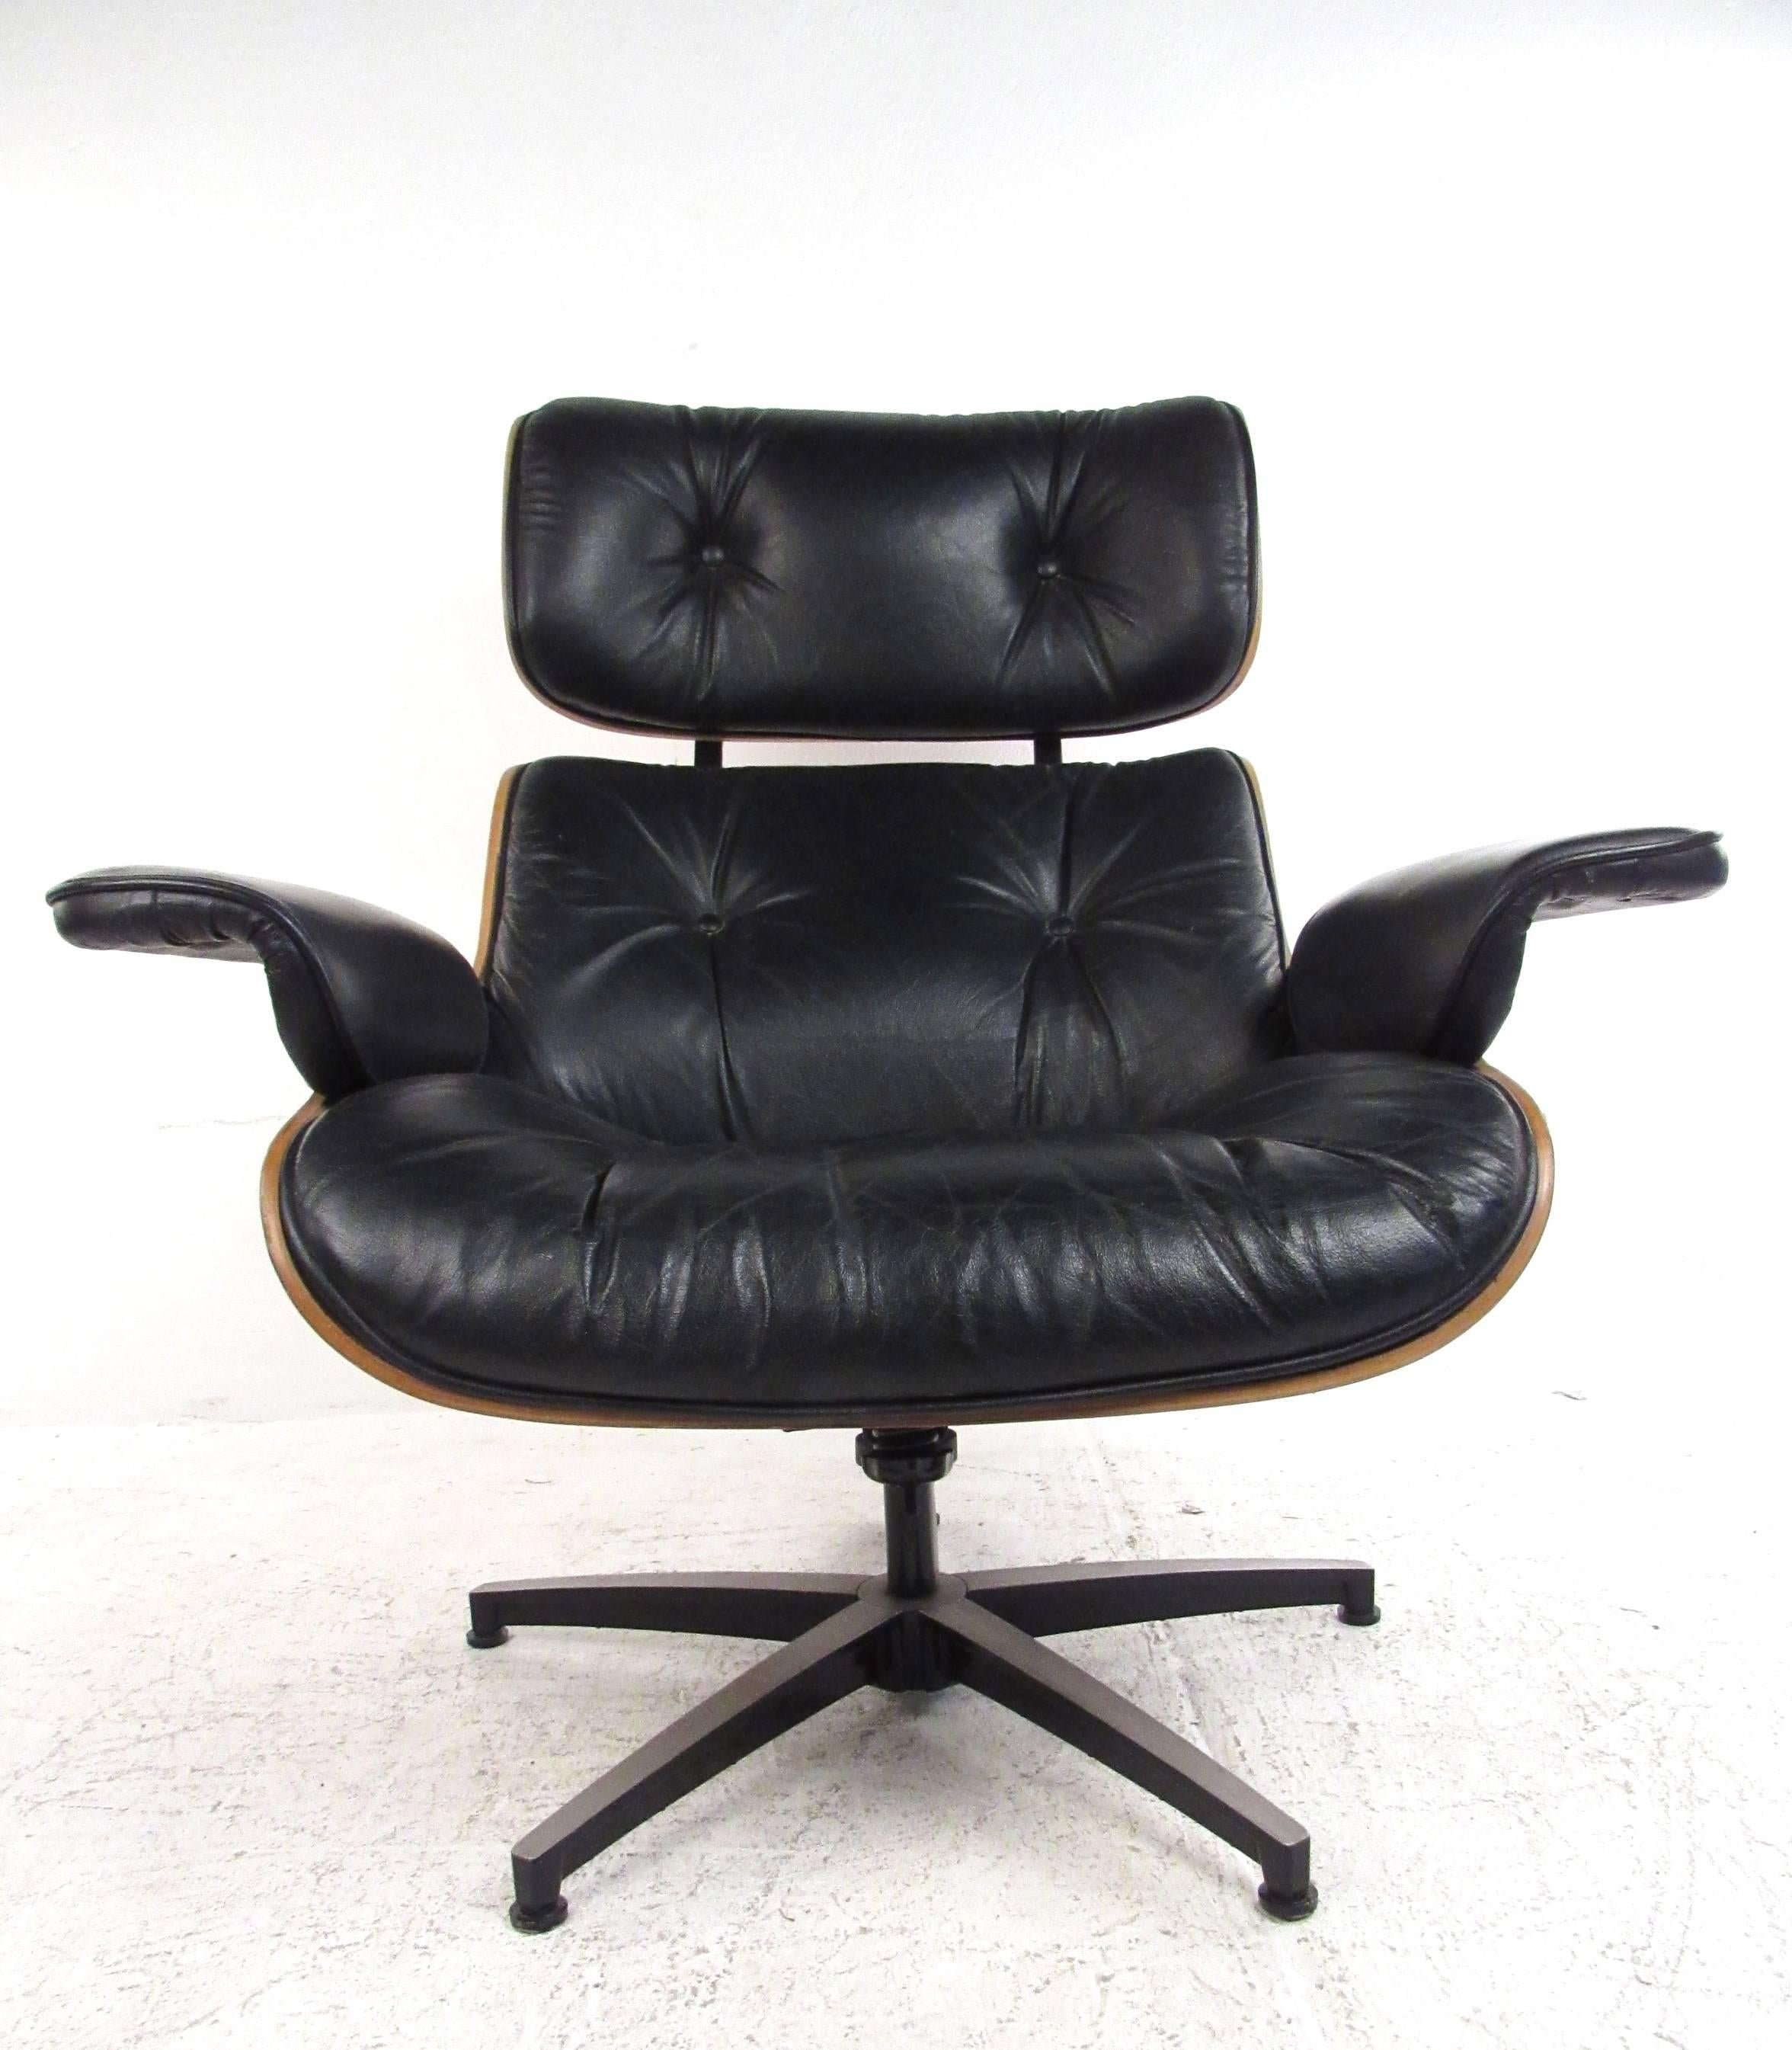 This Herman Miller style lounge chair features Mid-Century style with tufted vinyl upholstery and hardshell frame. Swivel/tilt base adds to the comfort of this plush lounge chair. Please confirm item location (NY or NJ).